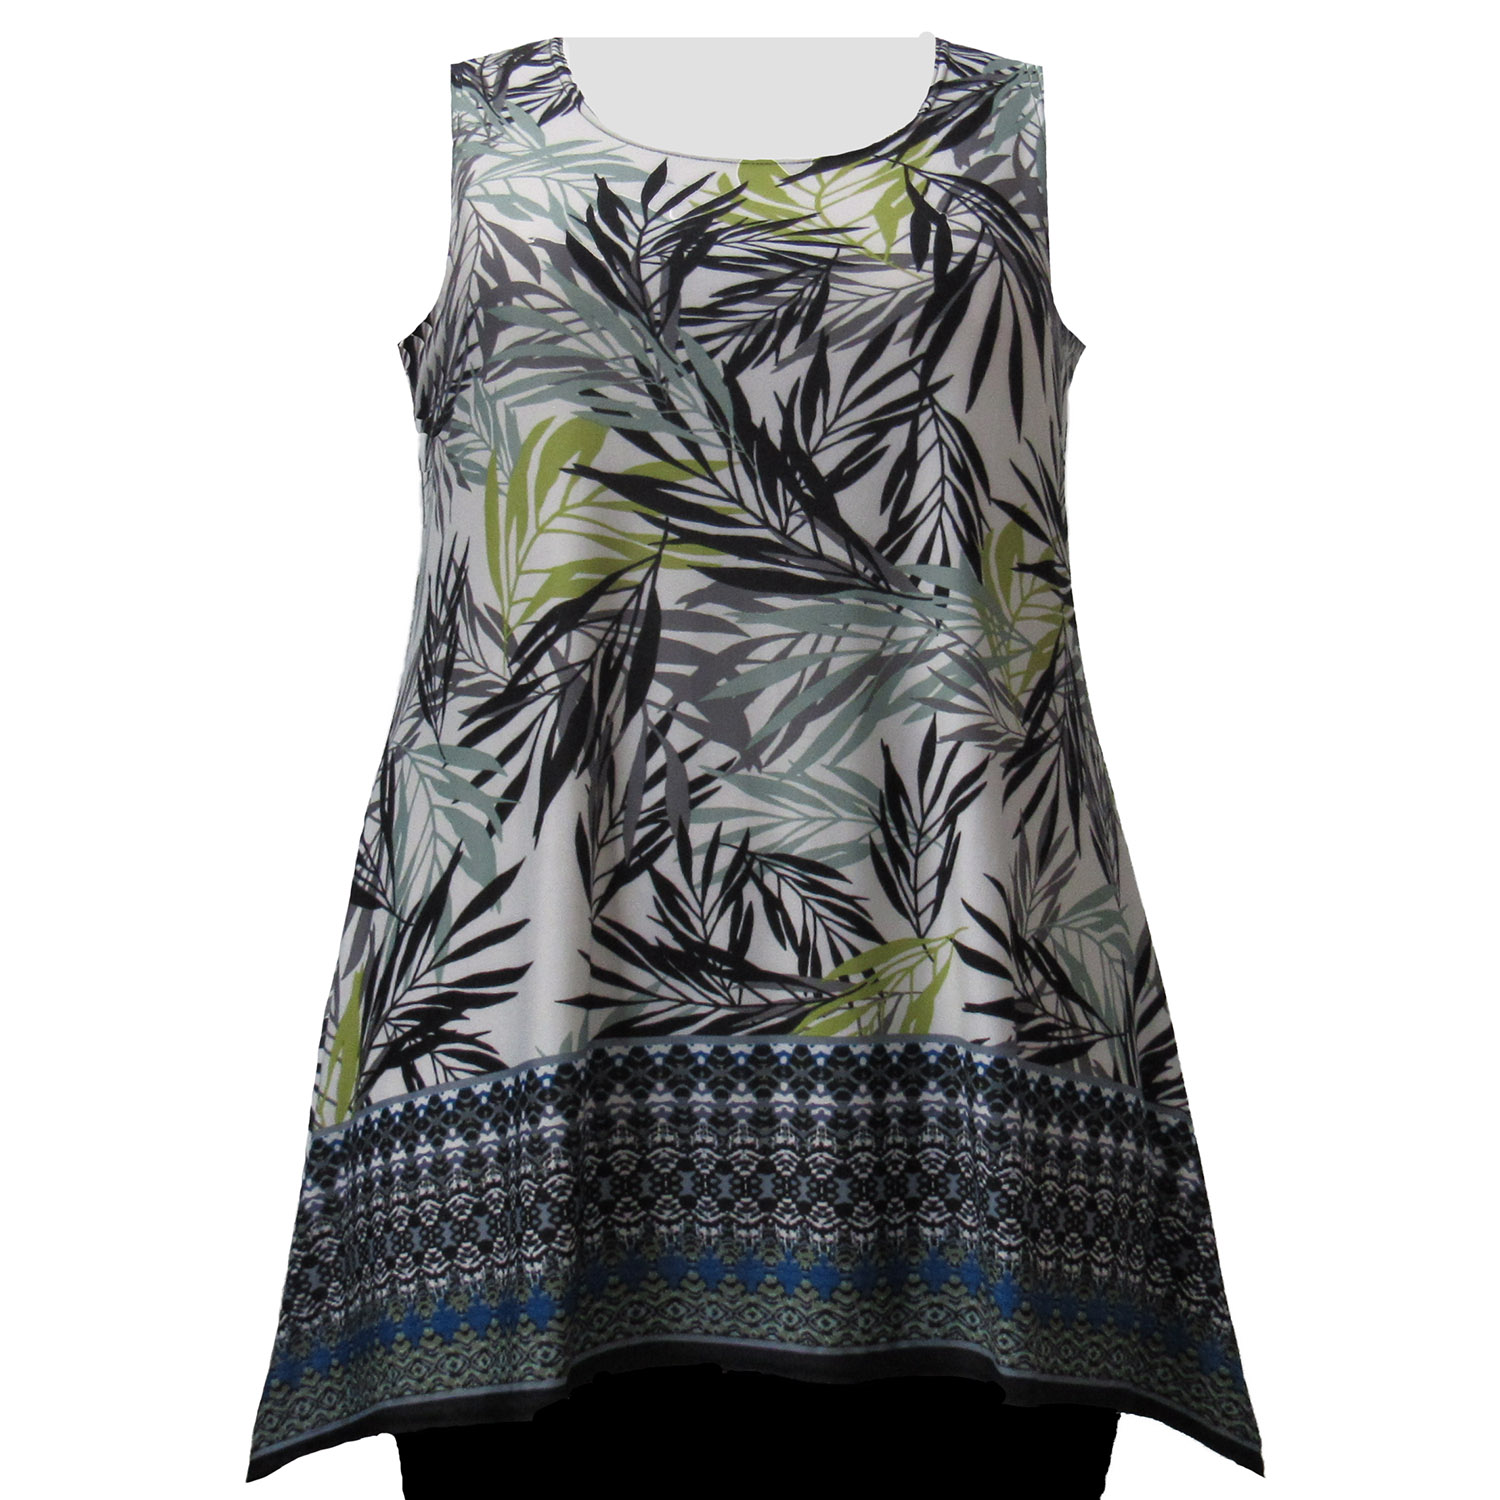 A Personal Touch Women's Plus Size Green Floral Border Print Tank Top 